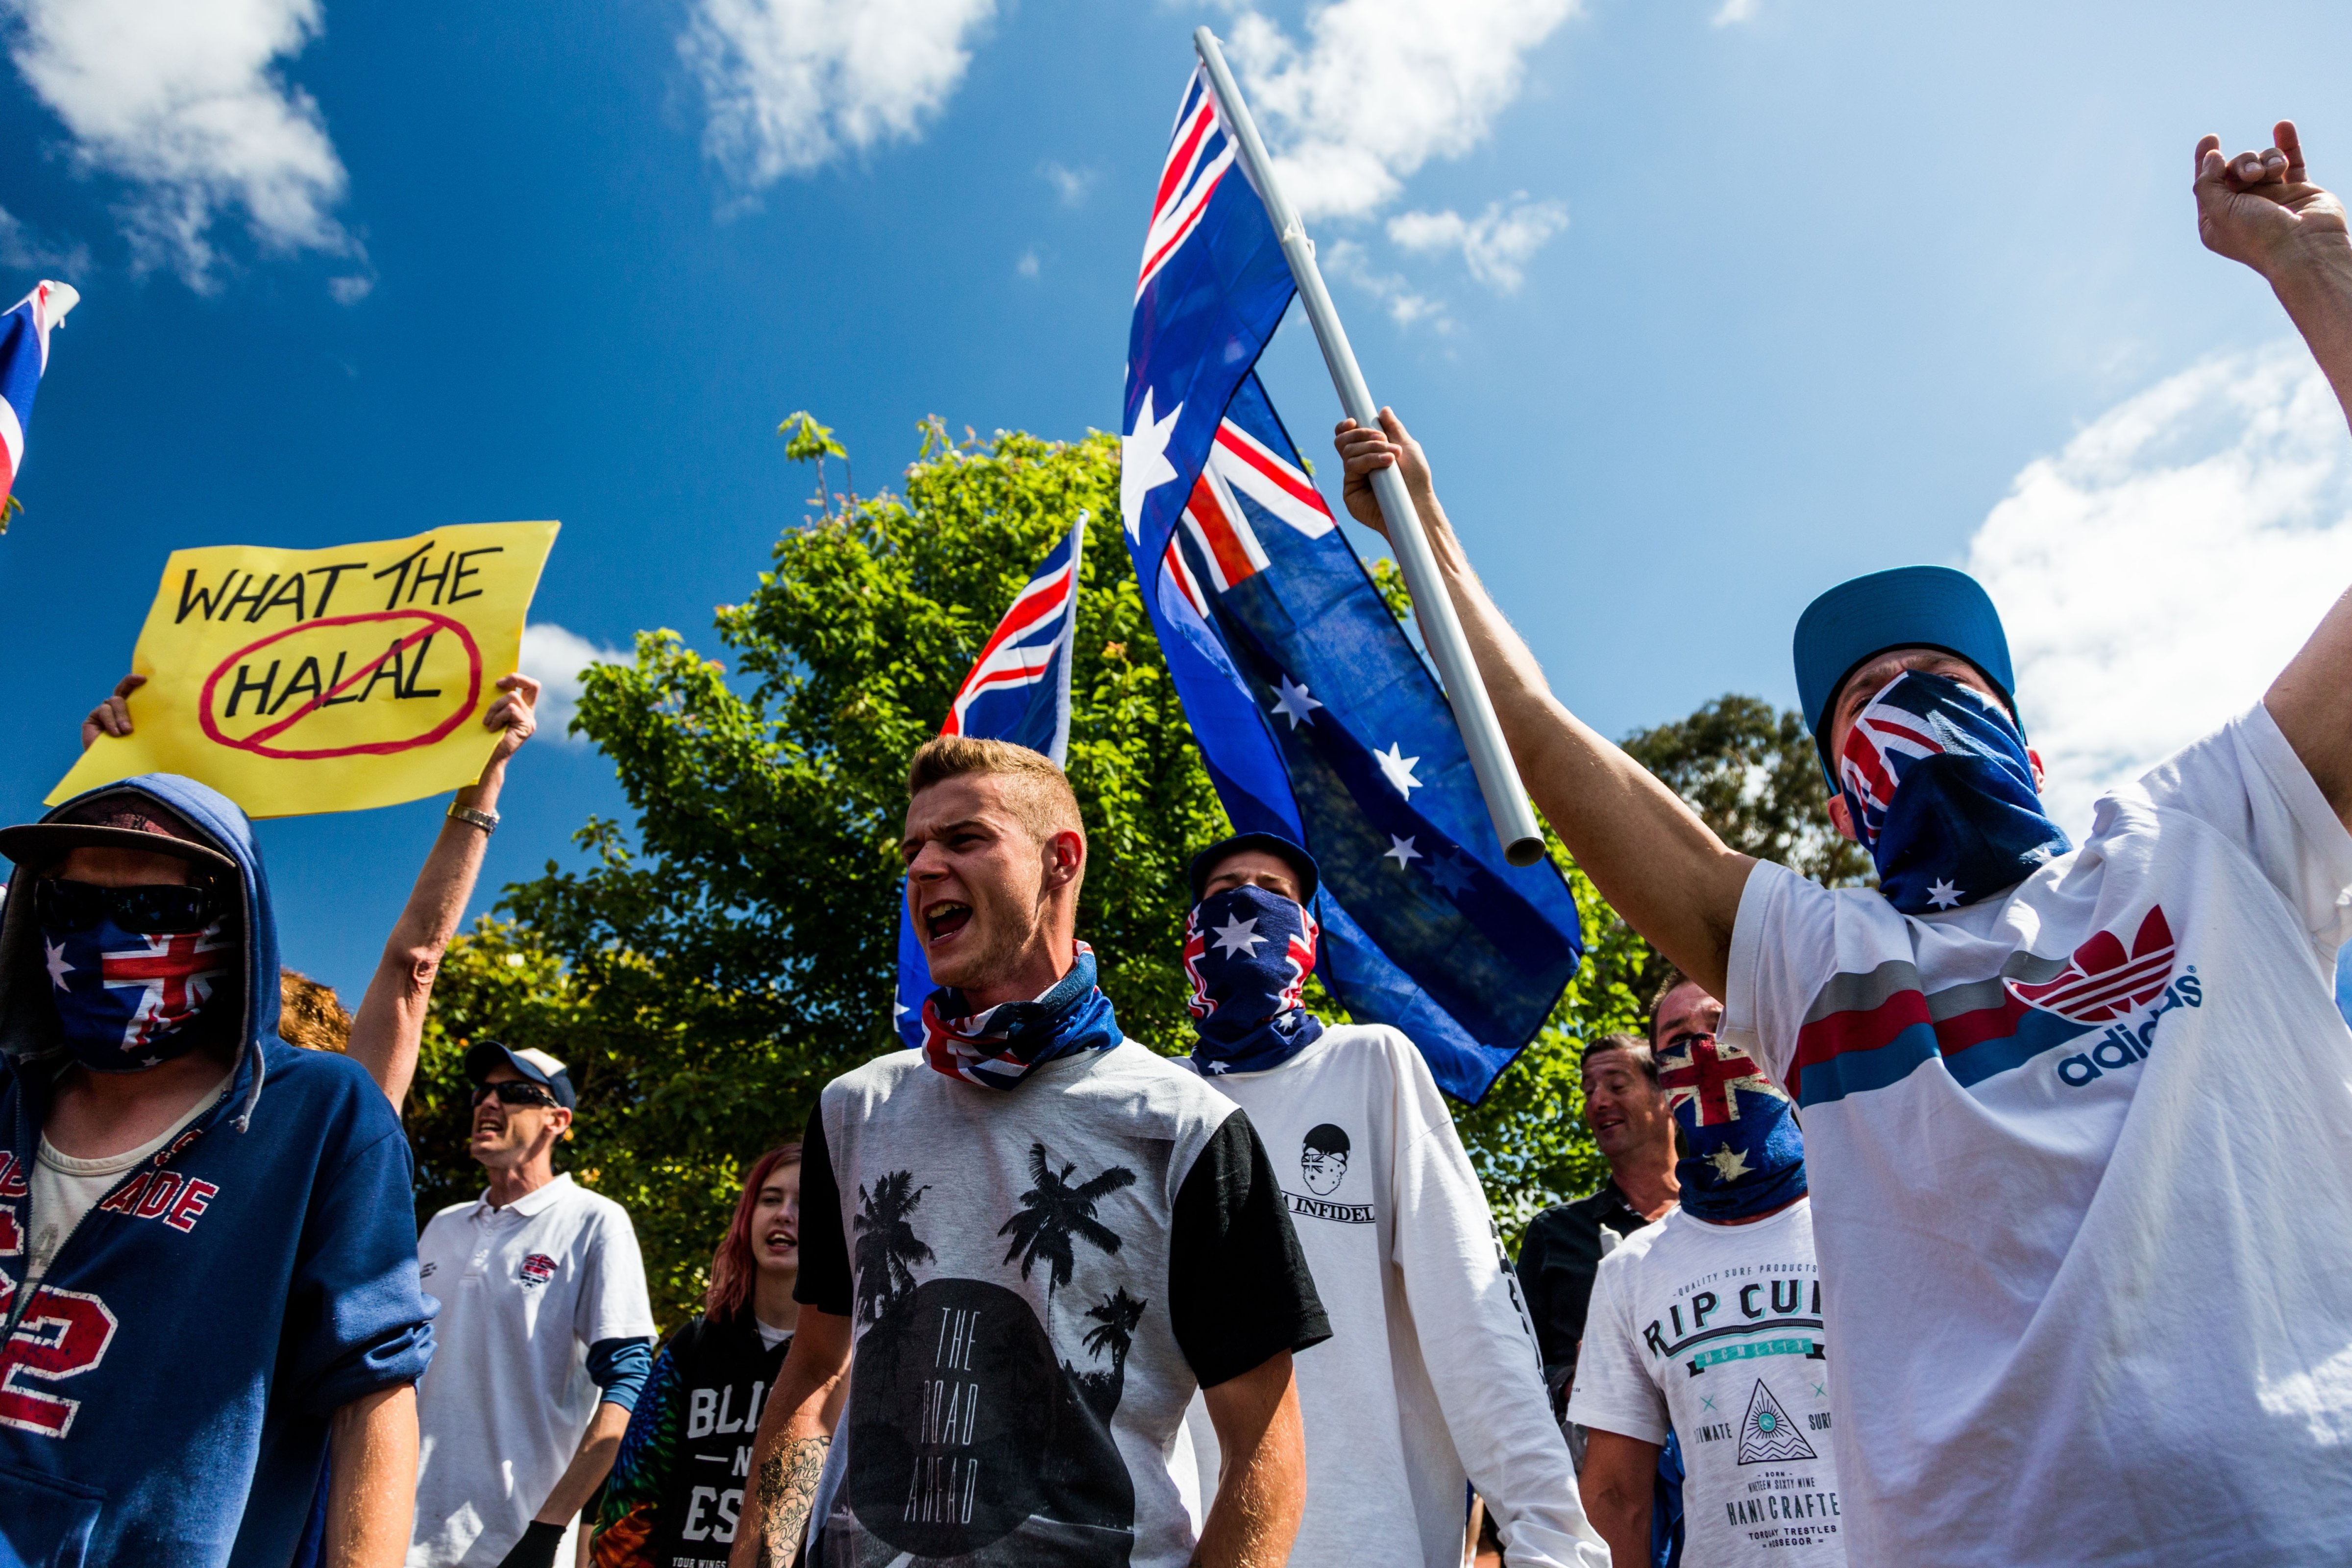 Supporters of the Reclaim Australia group march down the street waving flags and shouting anti-Islamic slogans during a protest in Melbourne on Nov. 22, 2015 (Anadolu Agency—Getty Images)